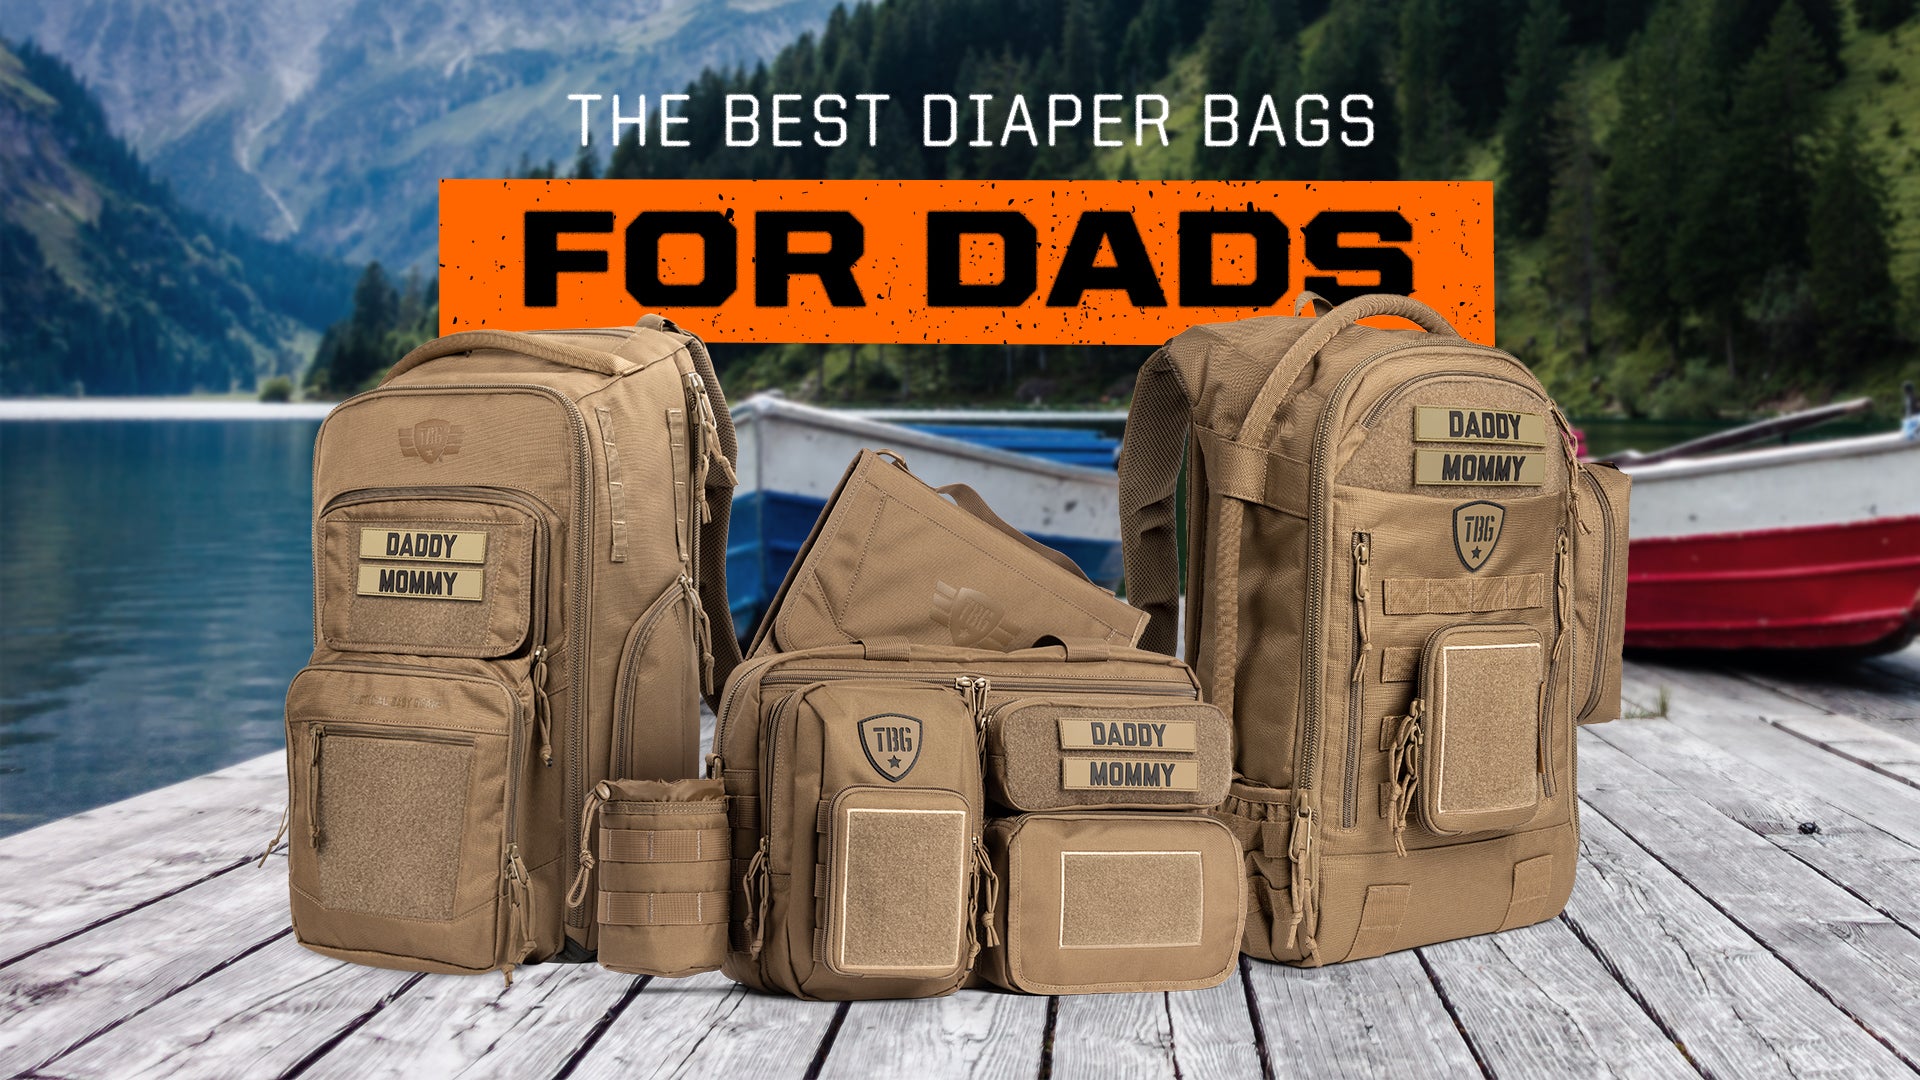 10 Best Diaper Bags for Dads for Fathers Day